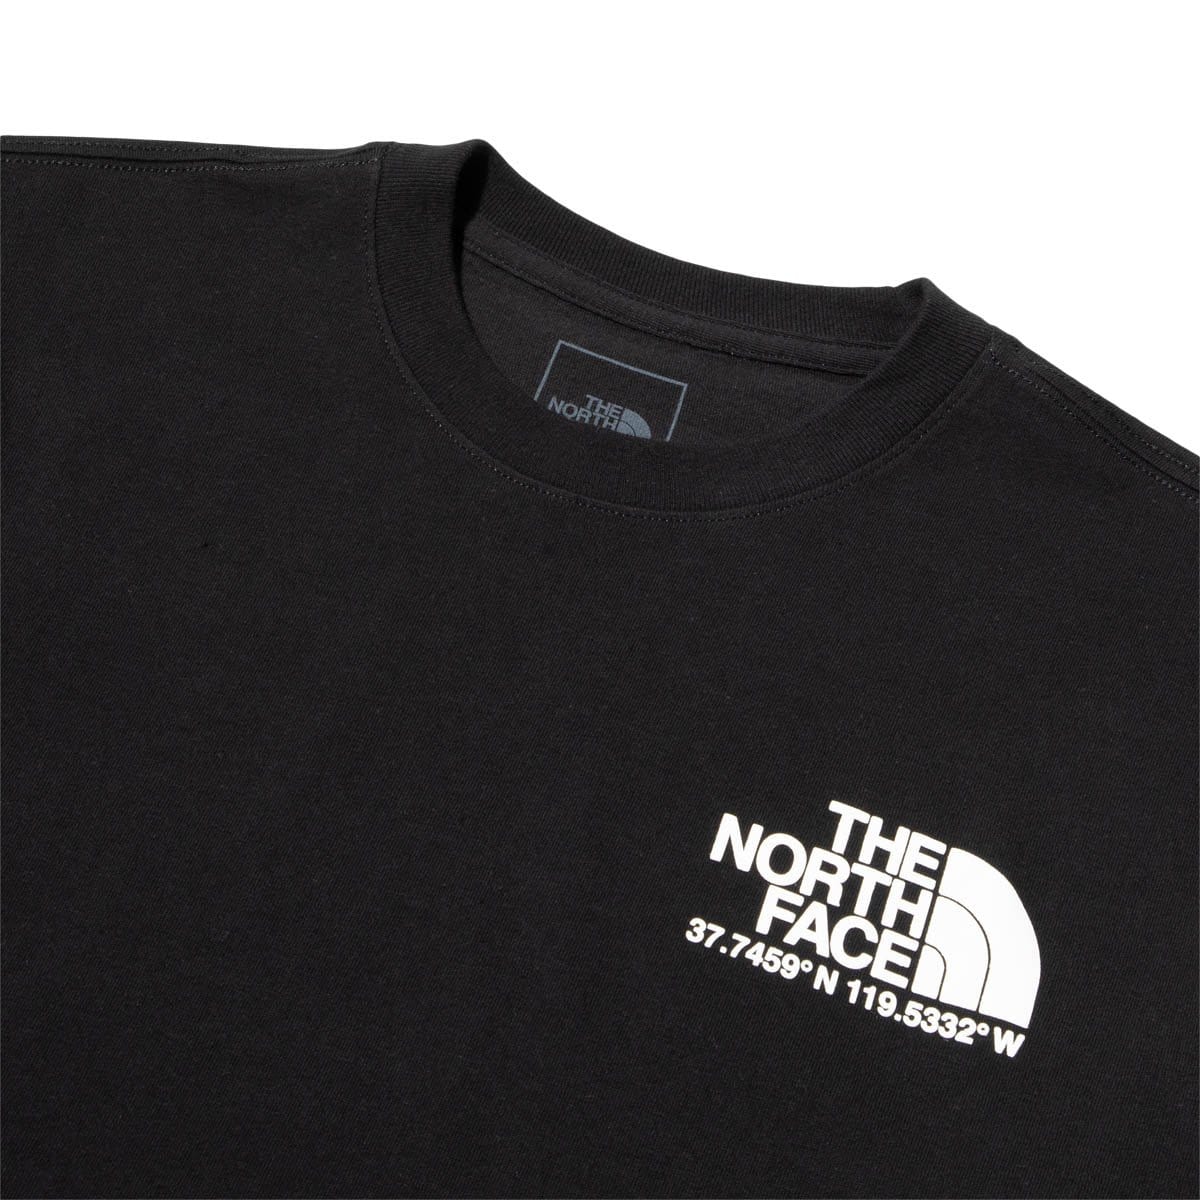 The North Face T-Shirts LOGO PLUS TEE